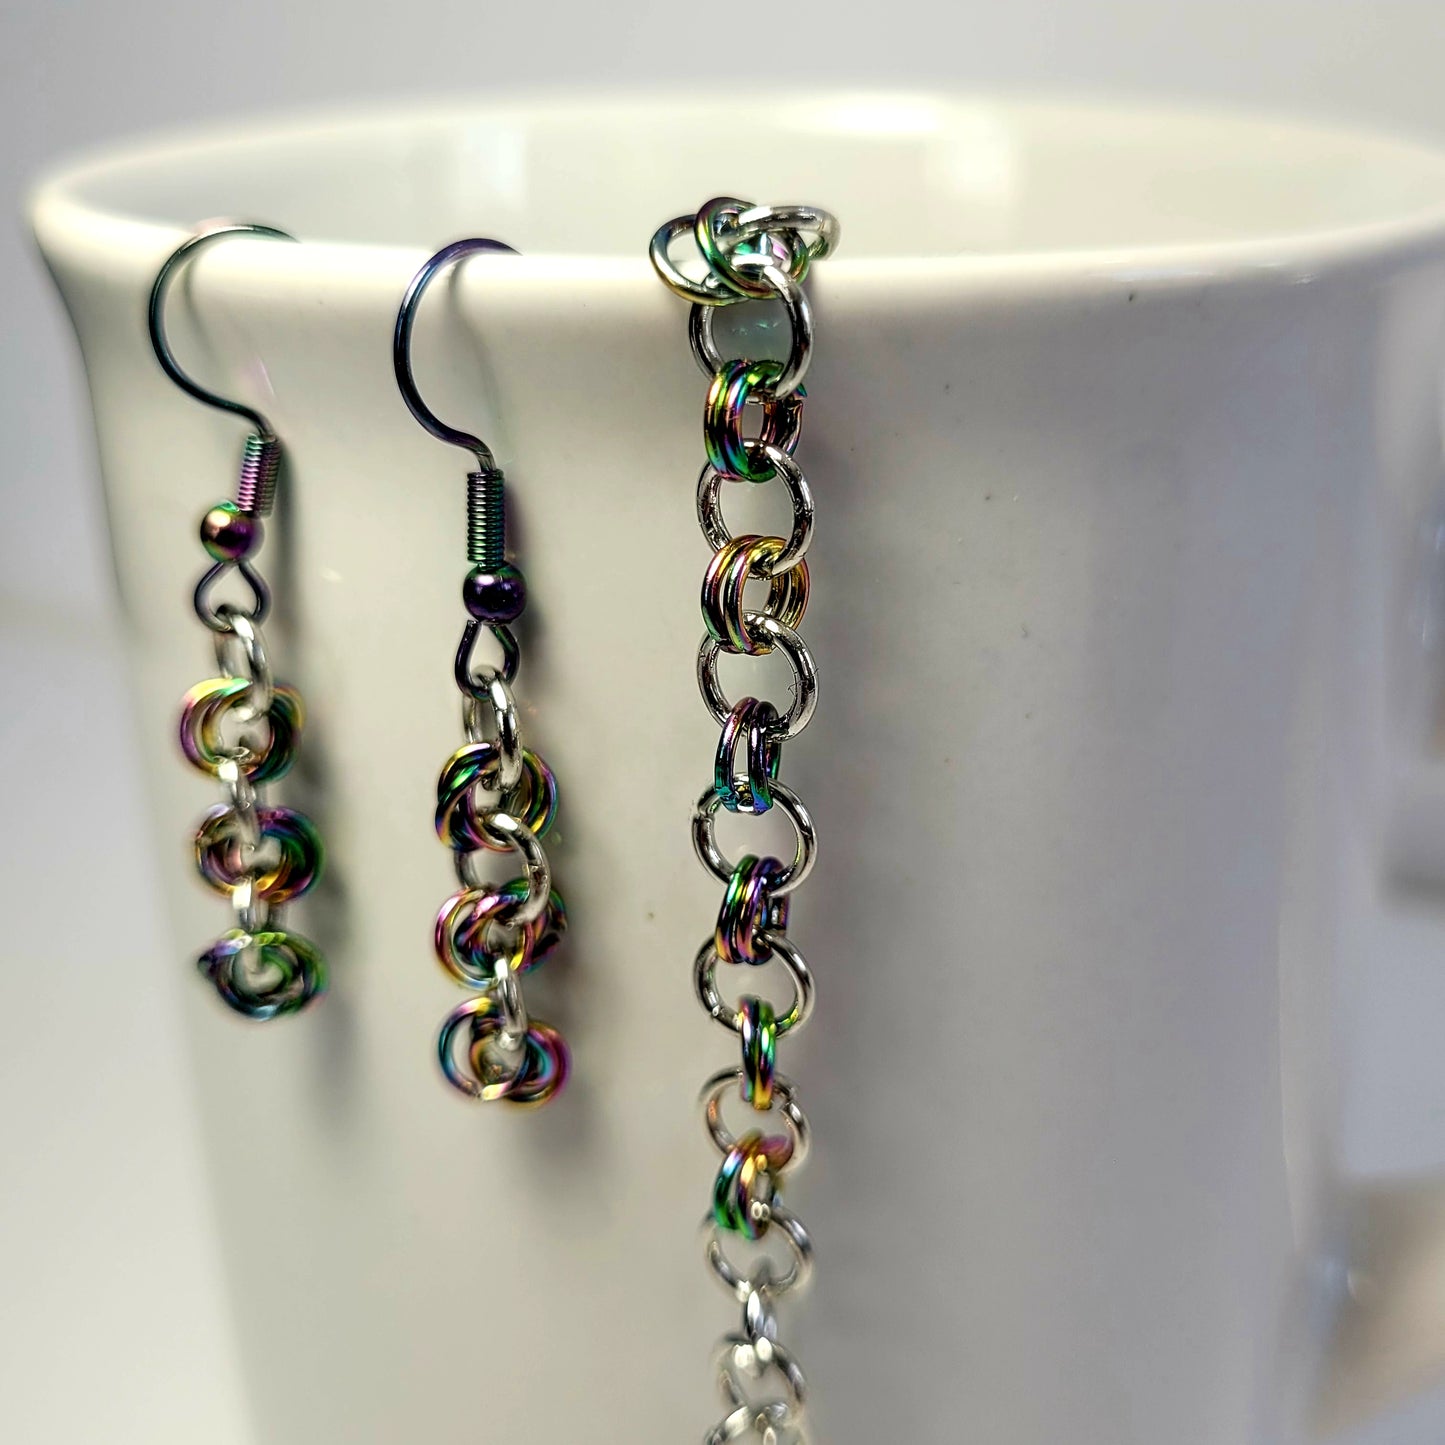 Bracelet and earring set, multichrome, rainbow stainless steel chainmail